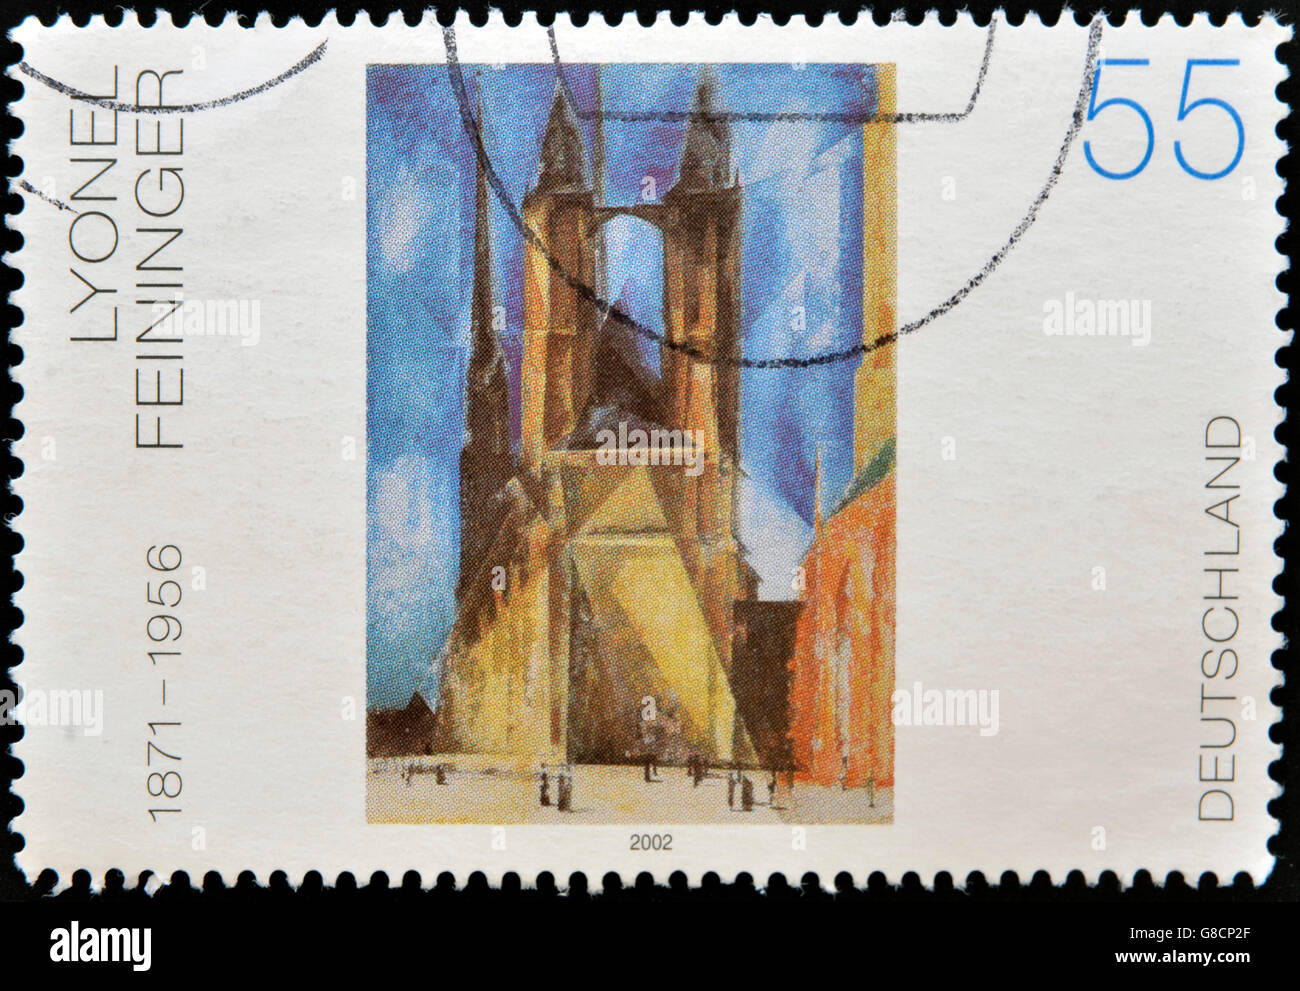 GERMANY - CIRCA 2002: A stamp printed in Germany shows a work Halle market church by Lyonel Feiniger, circa 2002 Stock Photo